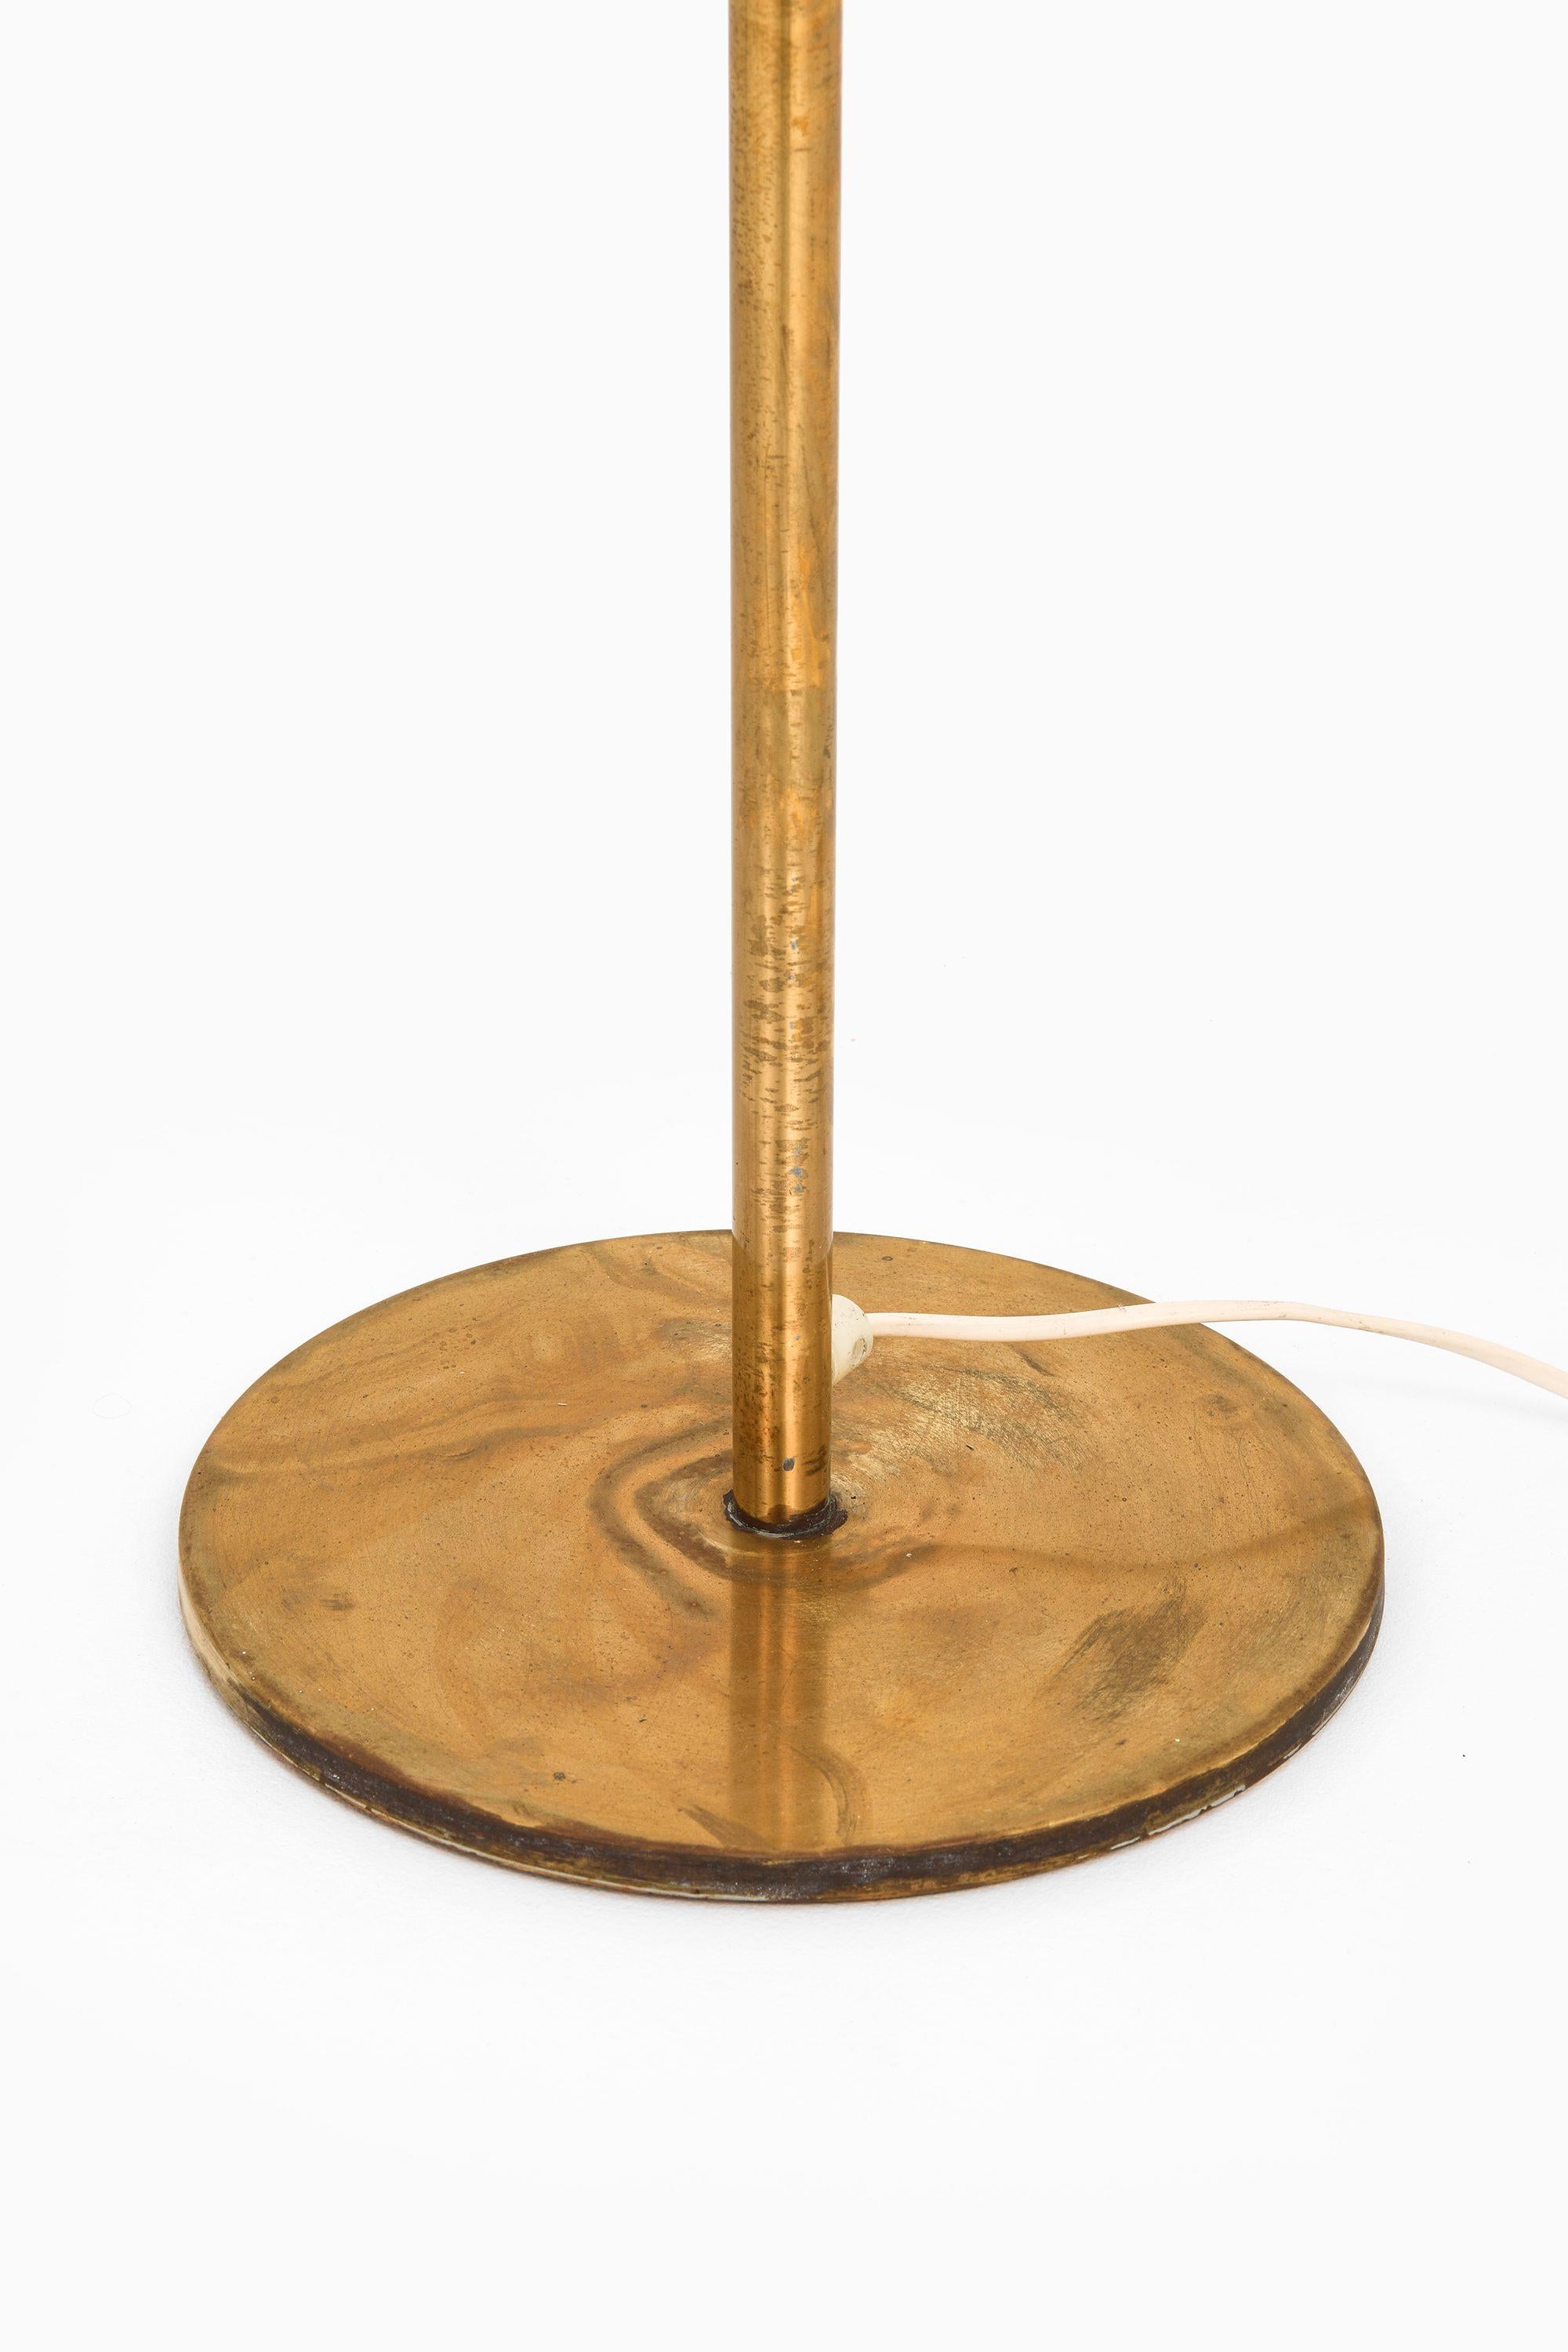 Floor Lamp in Brass, Plastic and Fabric by Uno and Östen Kristiansson, 1960's

Additional Information:
Material: Brass, plastic and fabric
Style: Mid century, Scandinavian
Produced by Luxus in Vittsjö, Sweden
Dimensions (W x D x H): 38 x 38 x 139.5